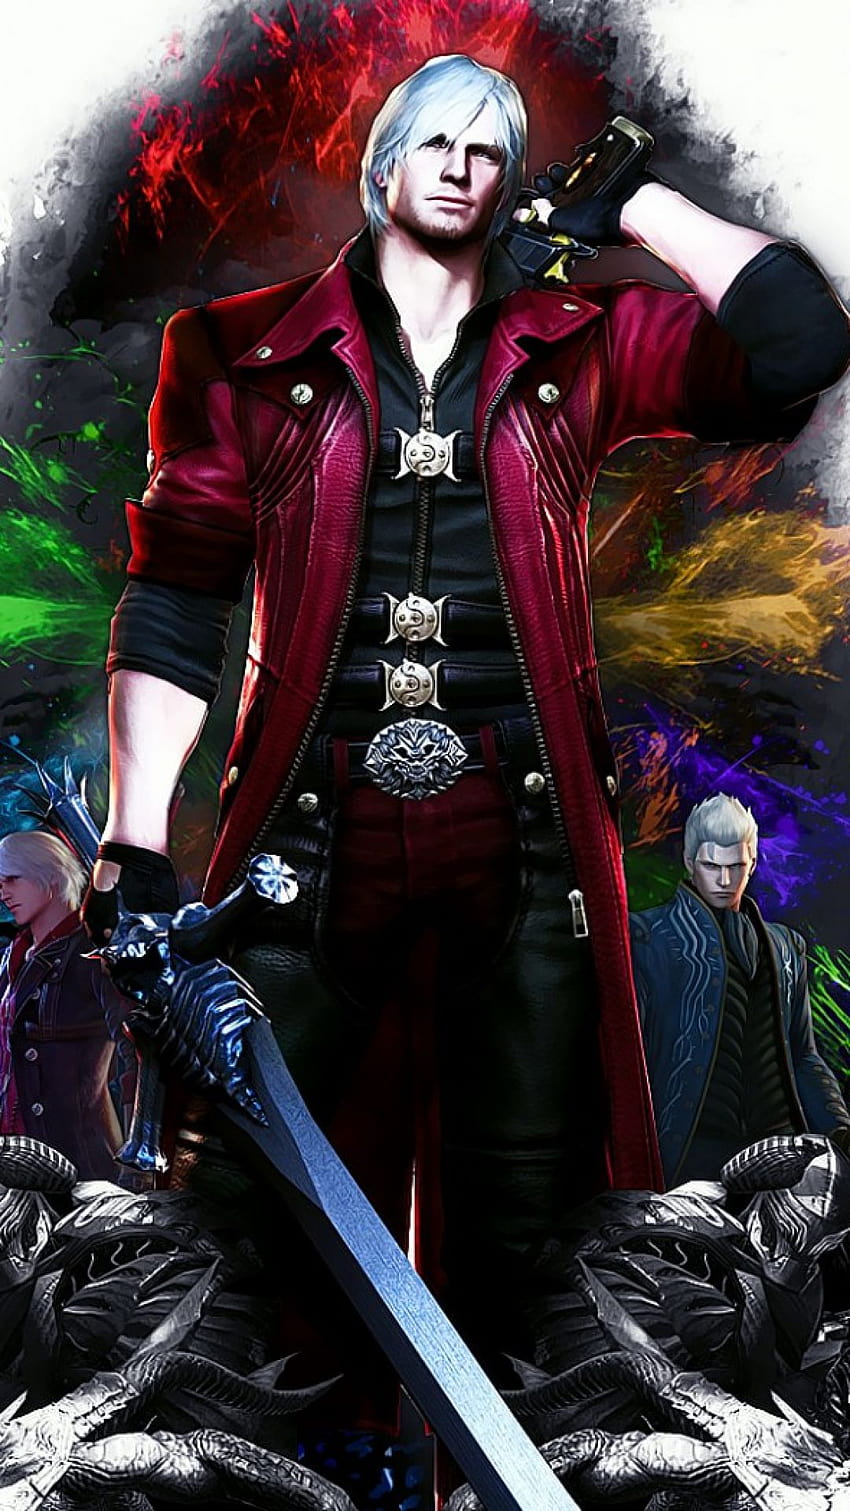 Sony Xperia Z1, ZL, Z, Samsung Galaxy S4, HTC One Devil may cry 4, devil may cry 4 iphone HD phone wallpaper